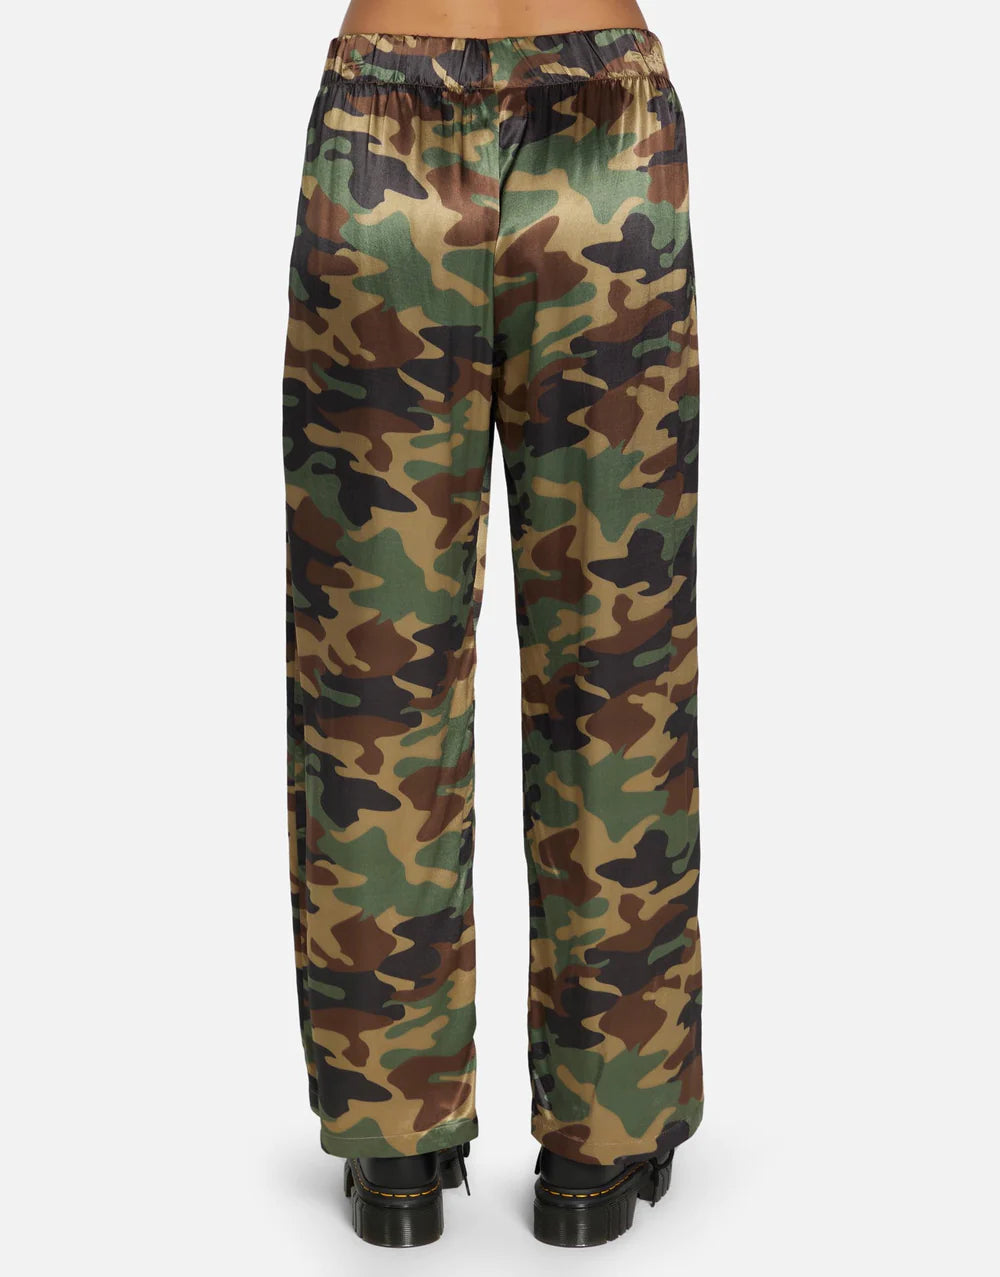 Mabel Camo Pant by Michael Lauren | Made in LA 100% Rayon Dry Clean Recommended ML Signature Soft Satin Fabric Elasticized Waistband Wide Leg Styling Side Pocket Detail | Alene Too located in  FL